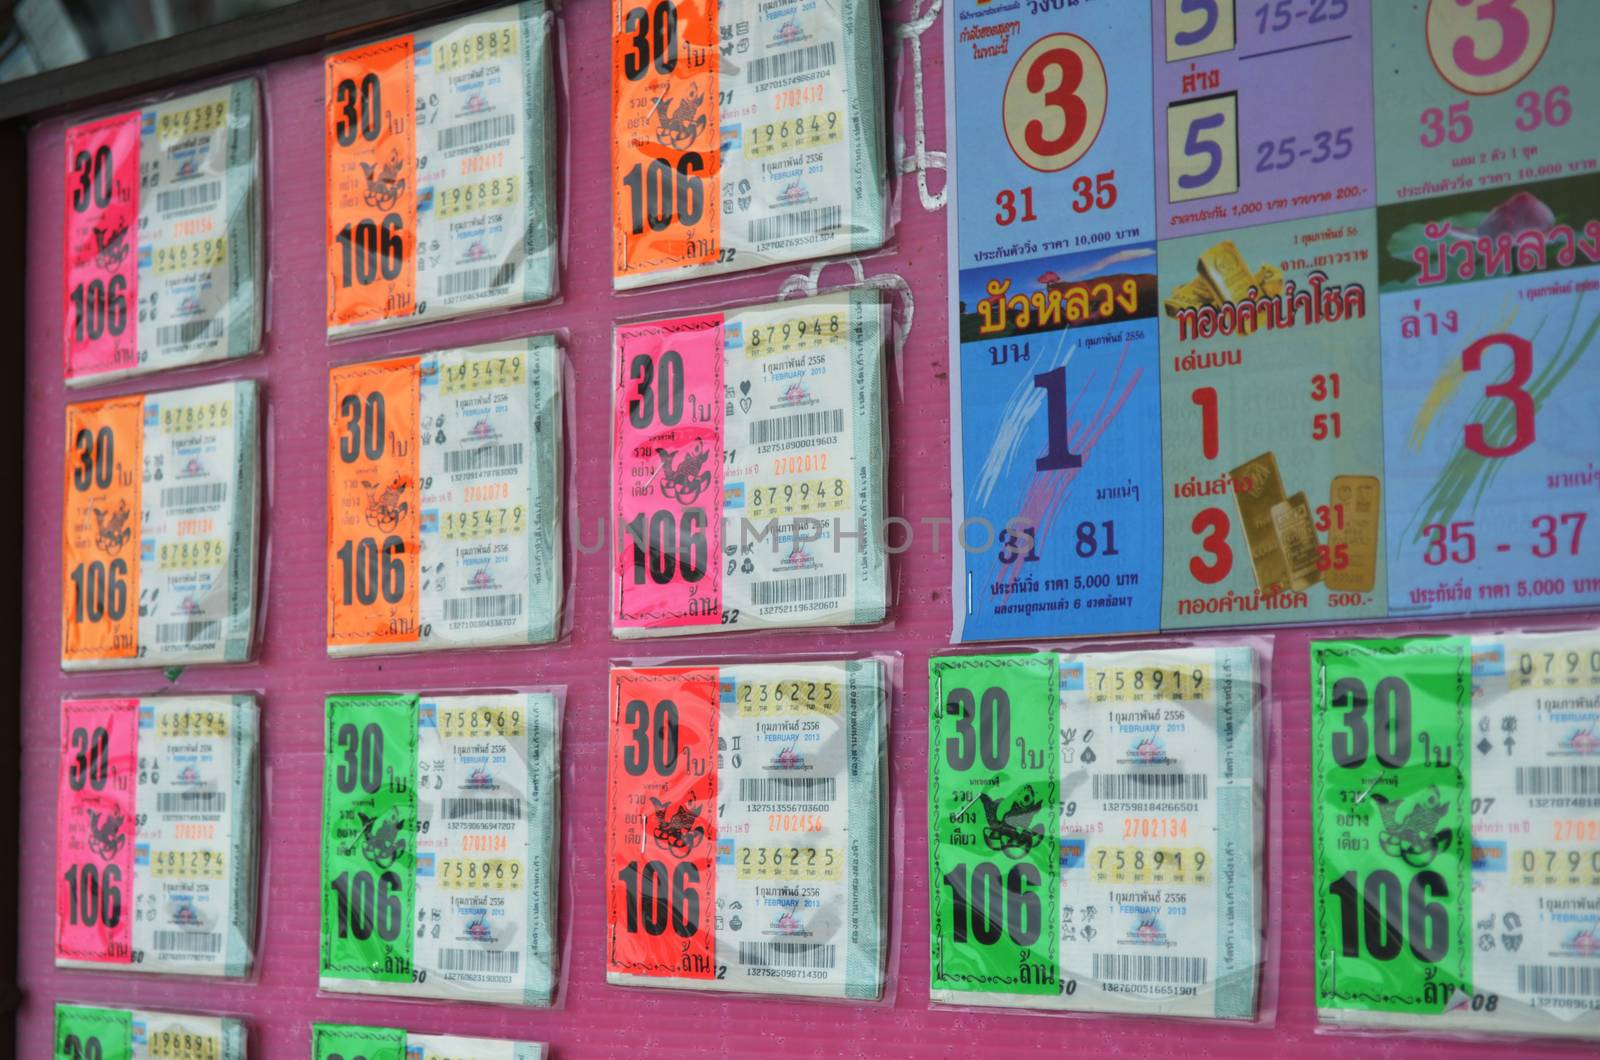 30 Tickets Series of Thai Lottery of 106 million bahts for Winne by kobfujar